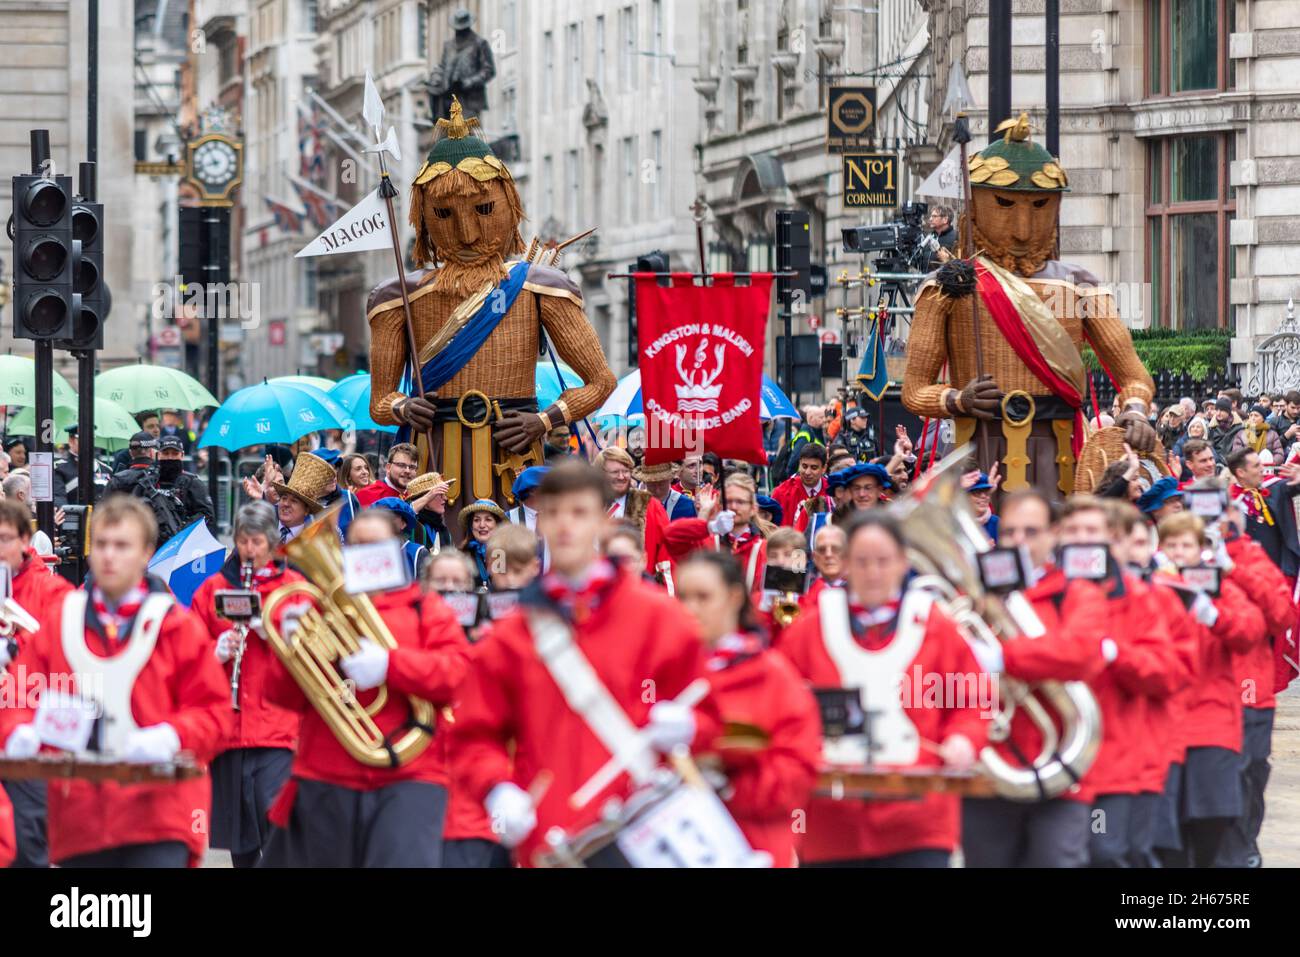 GOG & MAGOG, with GUILD OF YOUNG FREEMEN at the Lord Mayor's Show, Parade, procession passing along Poultry, near Mansion House, London, UK. City Stock Photo